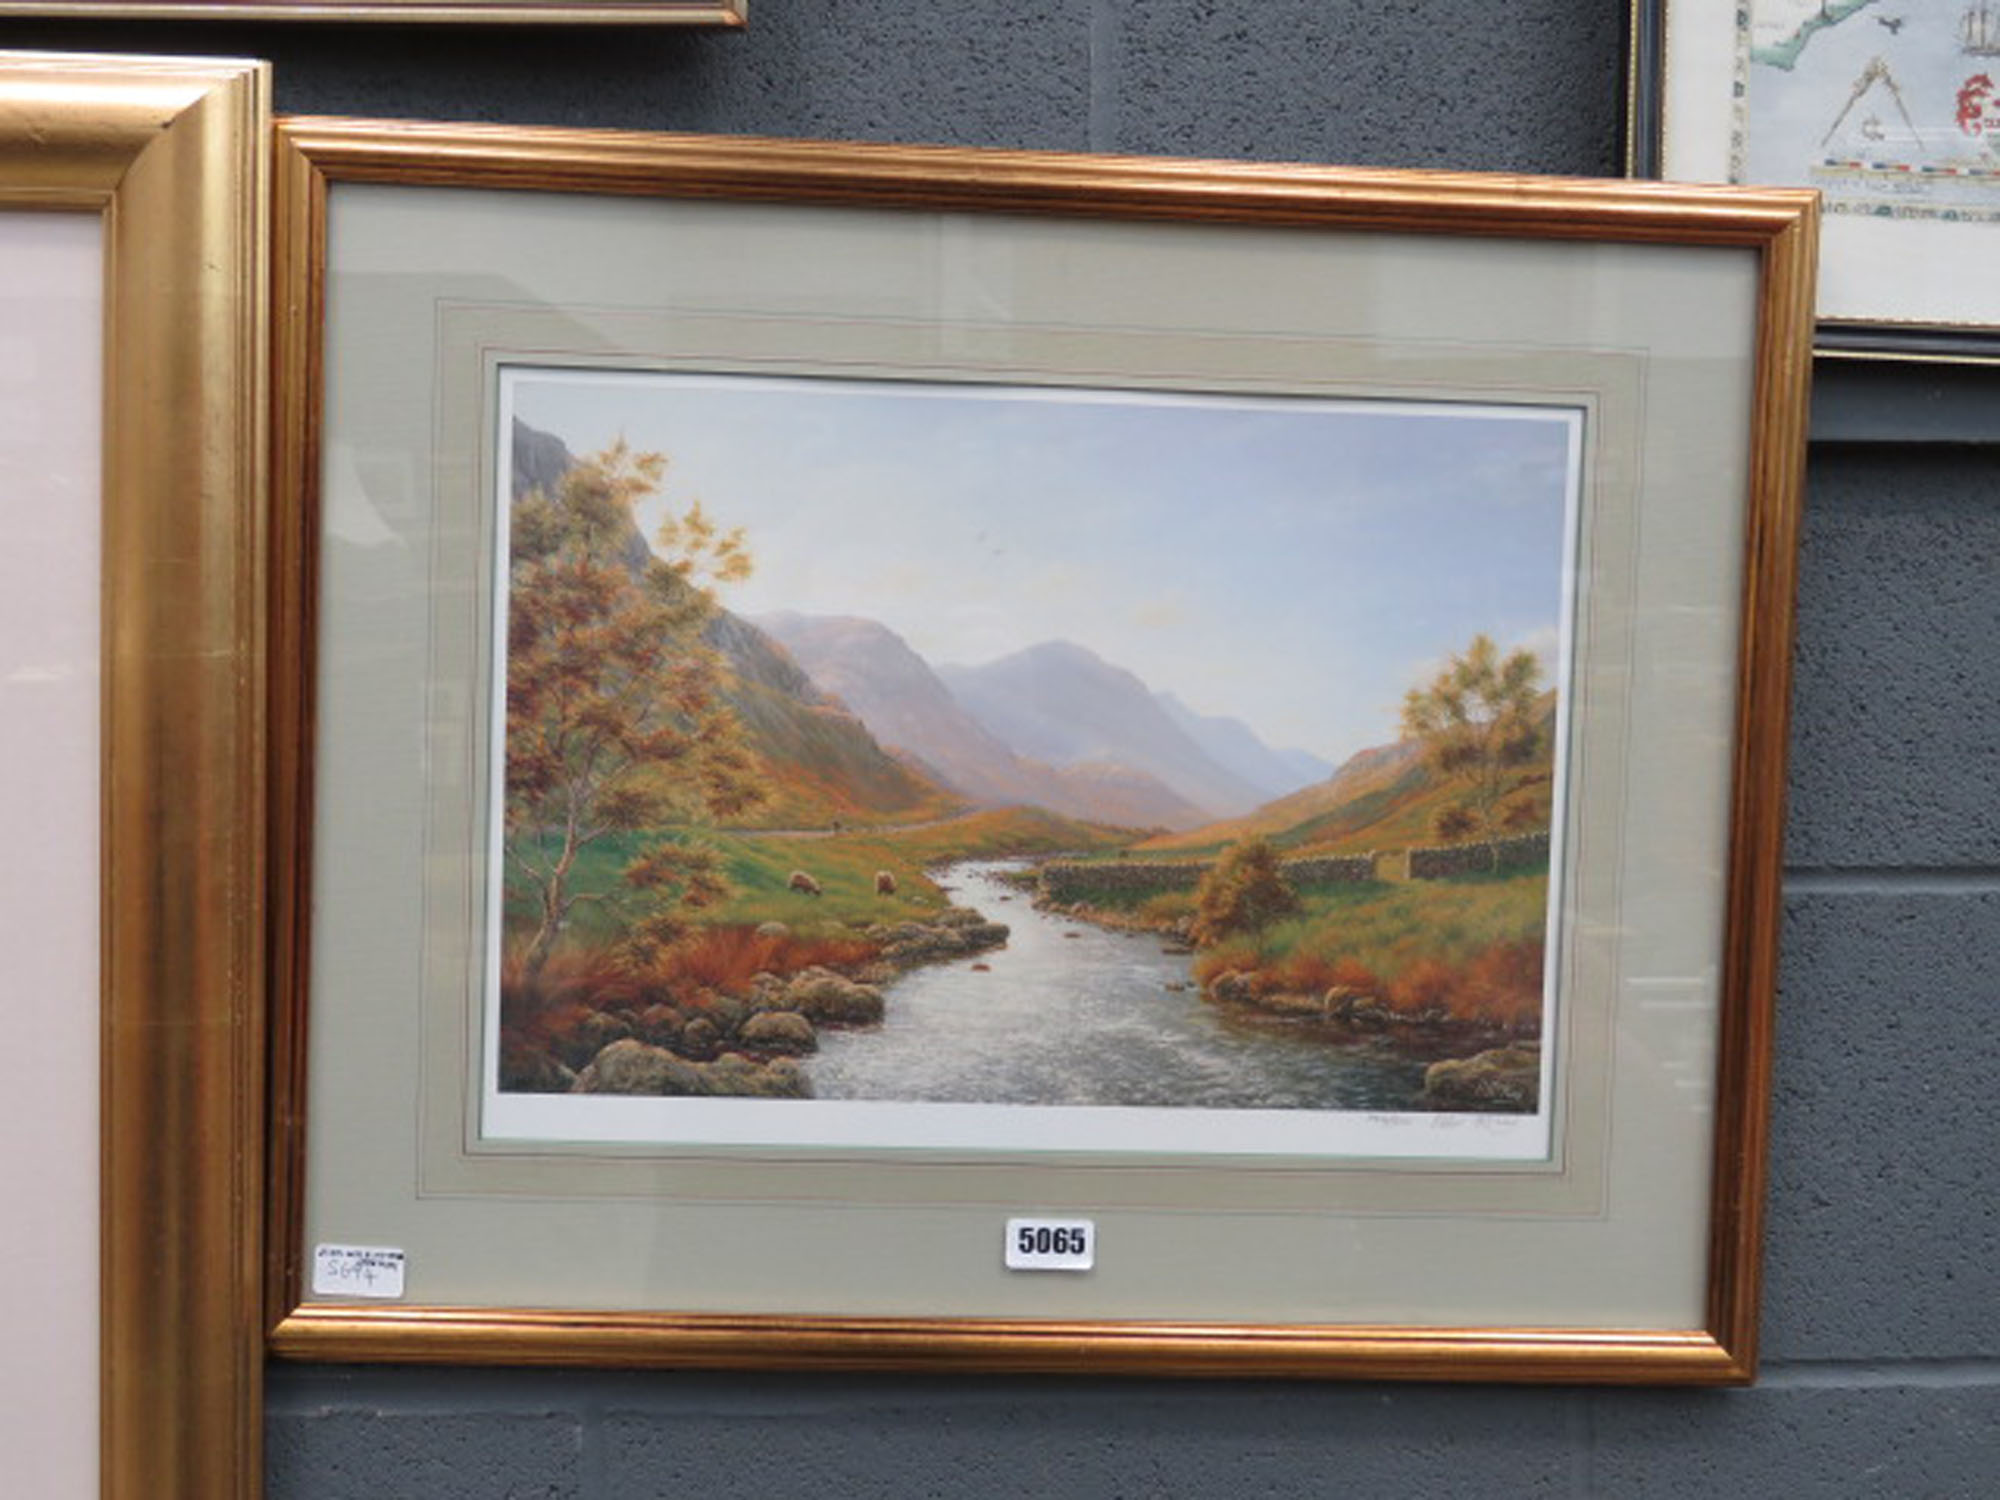 Blind stamped Peter McKay print - highland setting with sheep, stream and mountains